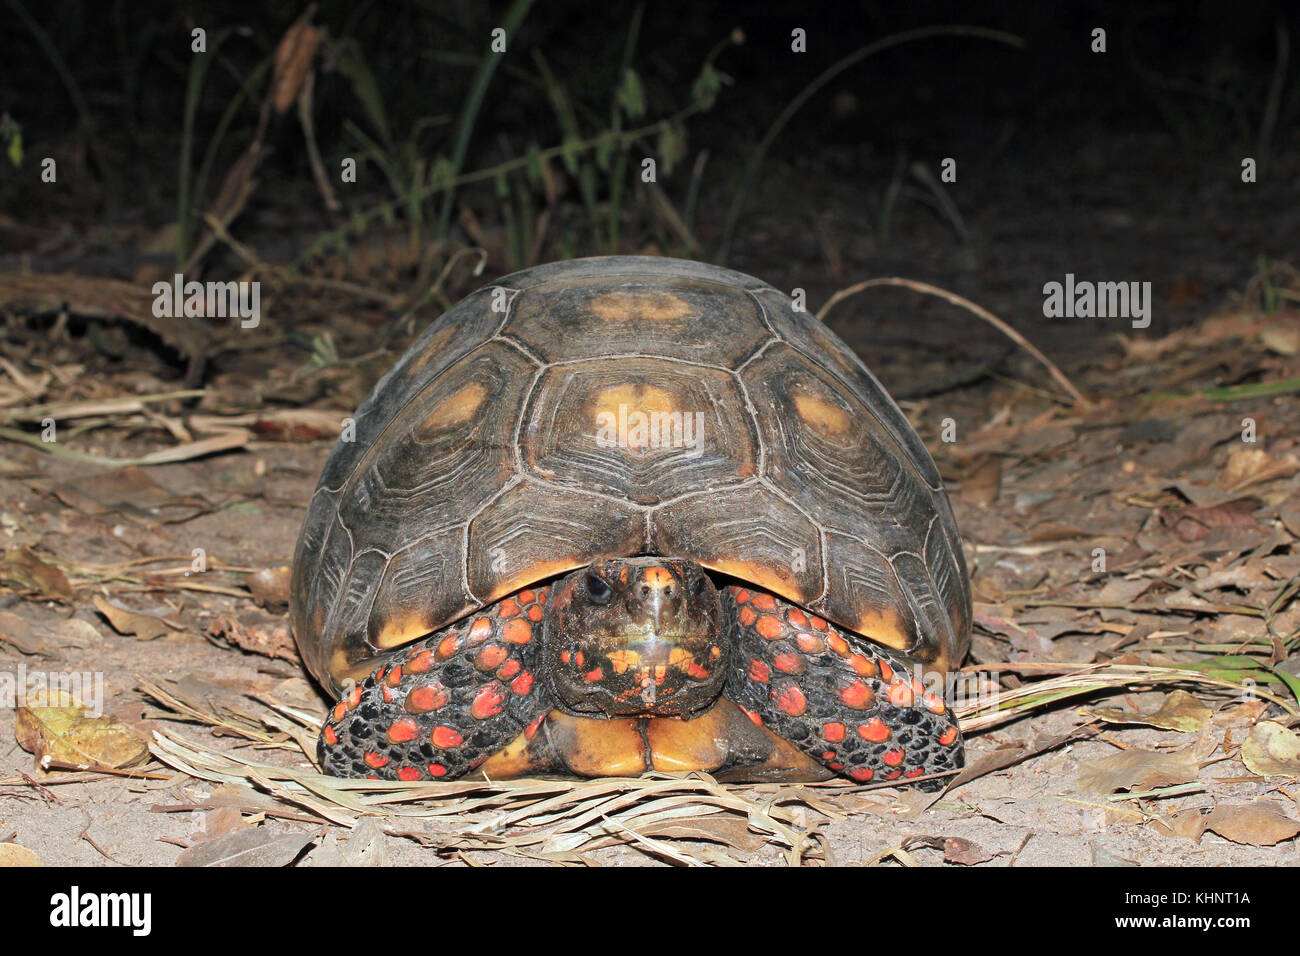 Red-footed Tortoise, Close-up from Front. Rio Claro, Pantanal, Brazil Stock Photo